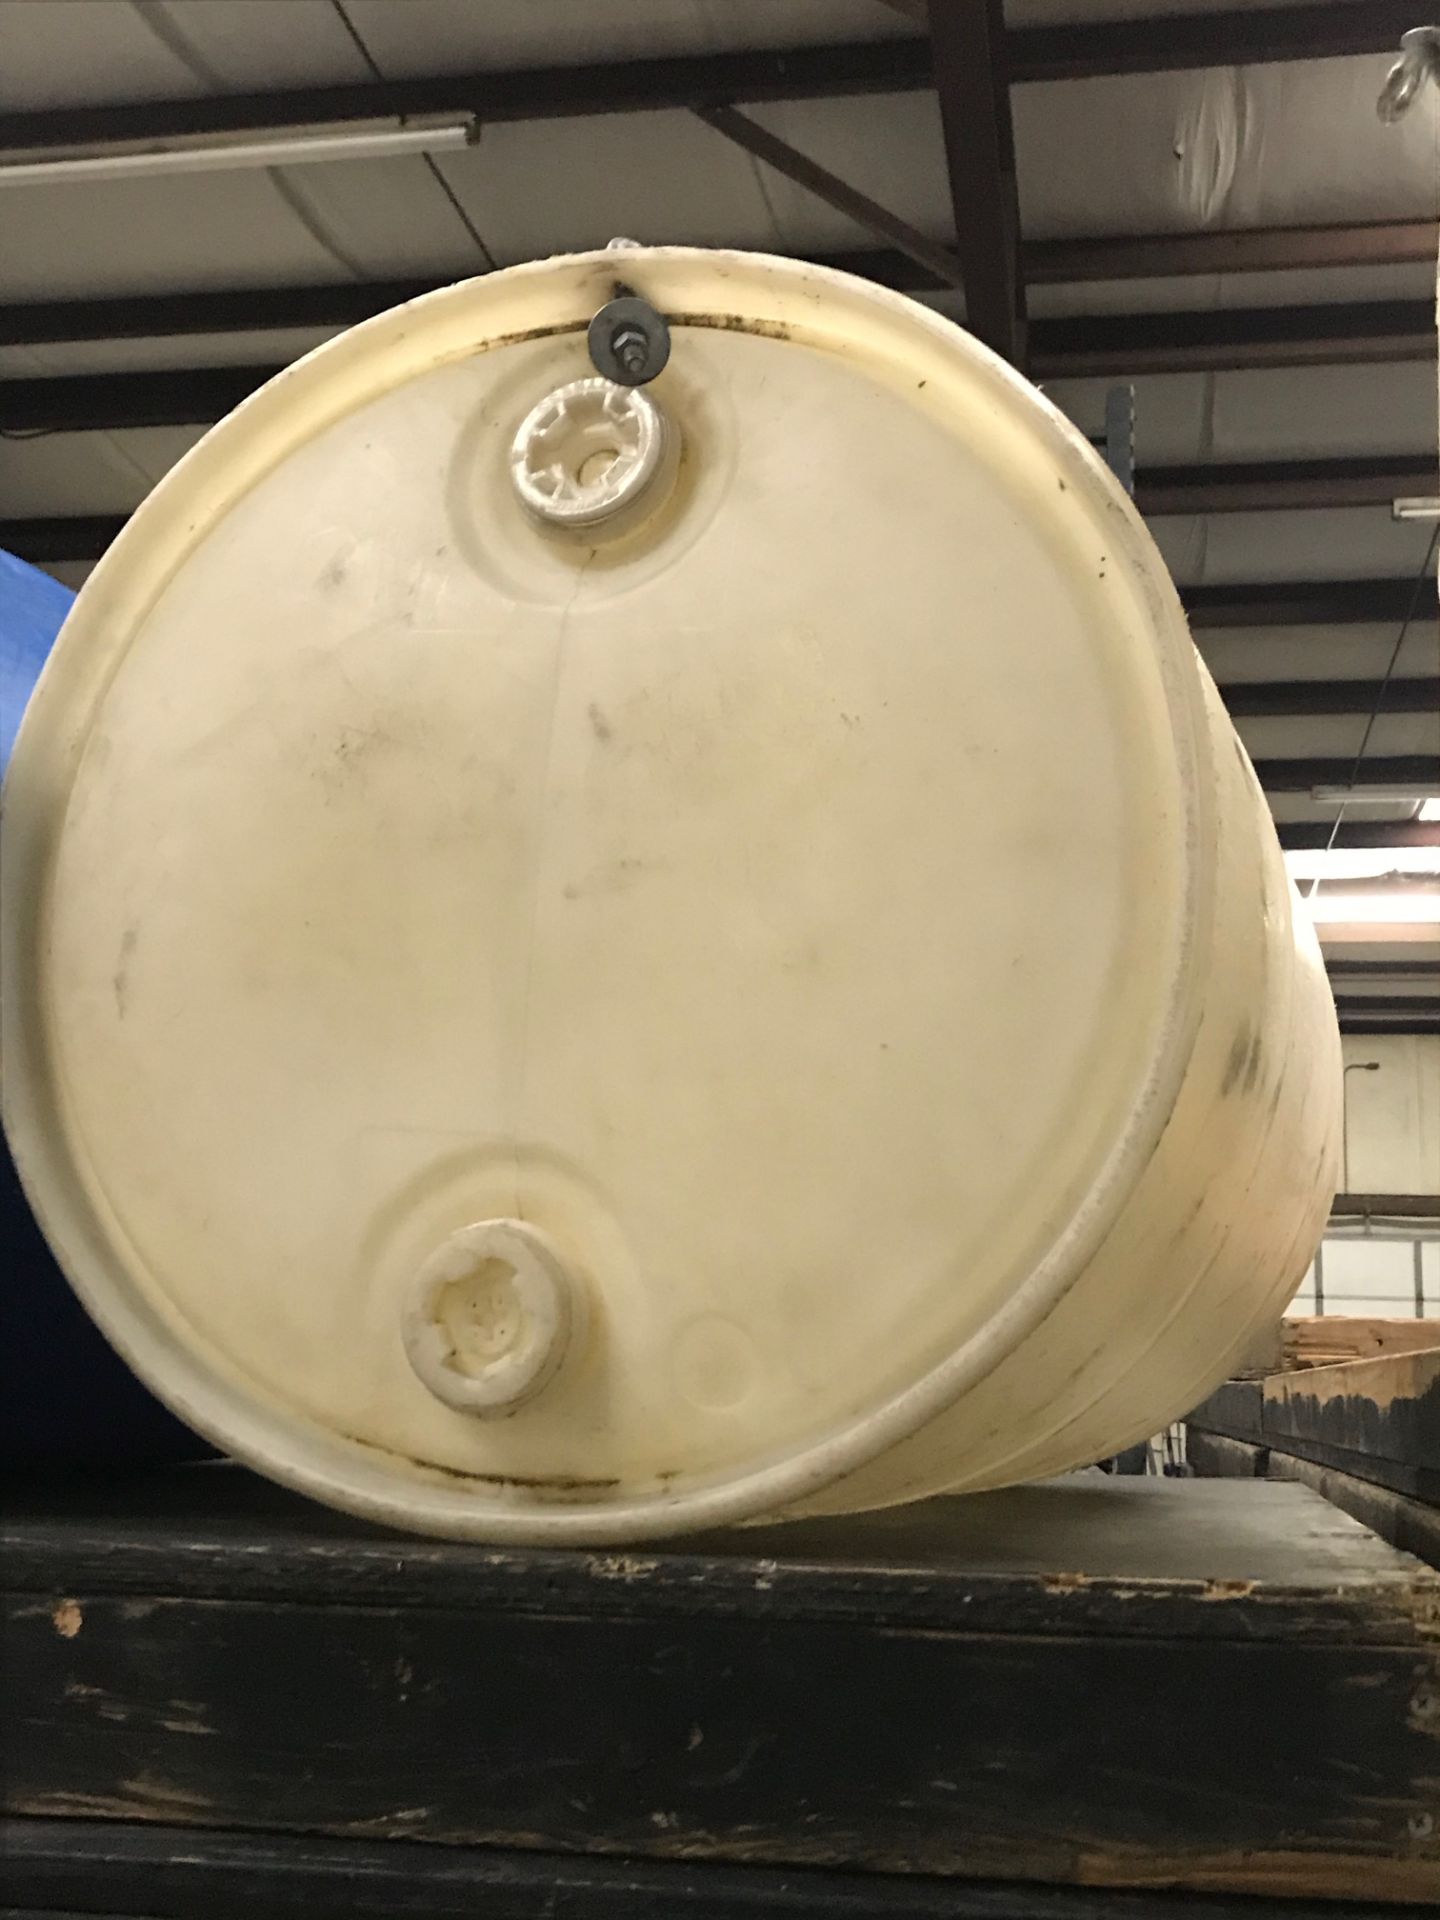 LOT OF: (4) 55 GALLON DRUMS W/ LIDS (USED FOR WATER WEIGHTS FOR RIGGING)